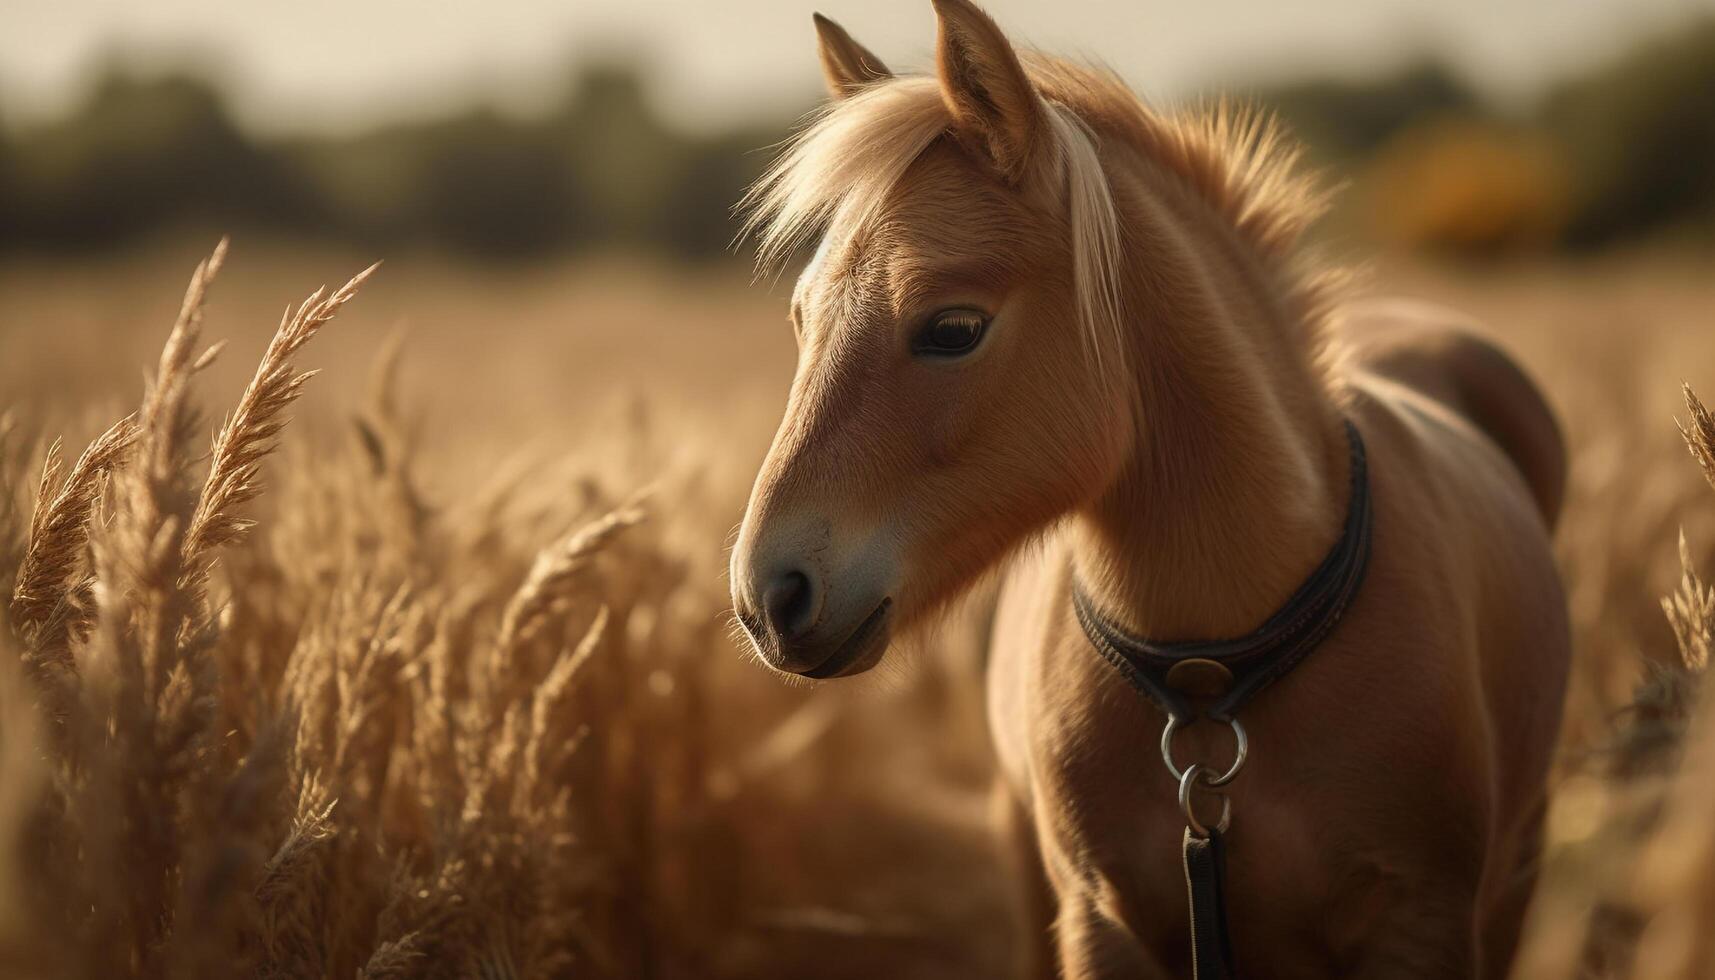 Cute horse grazing in meadow at sunset generated by AI photo